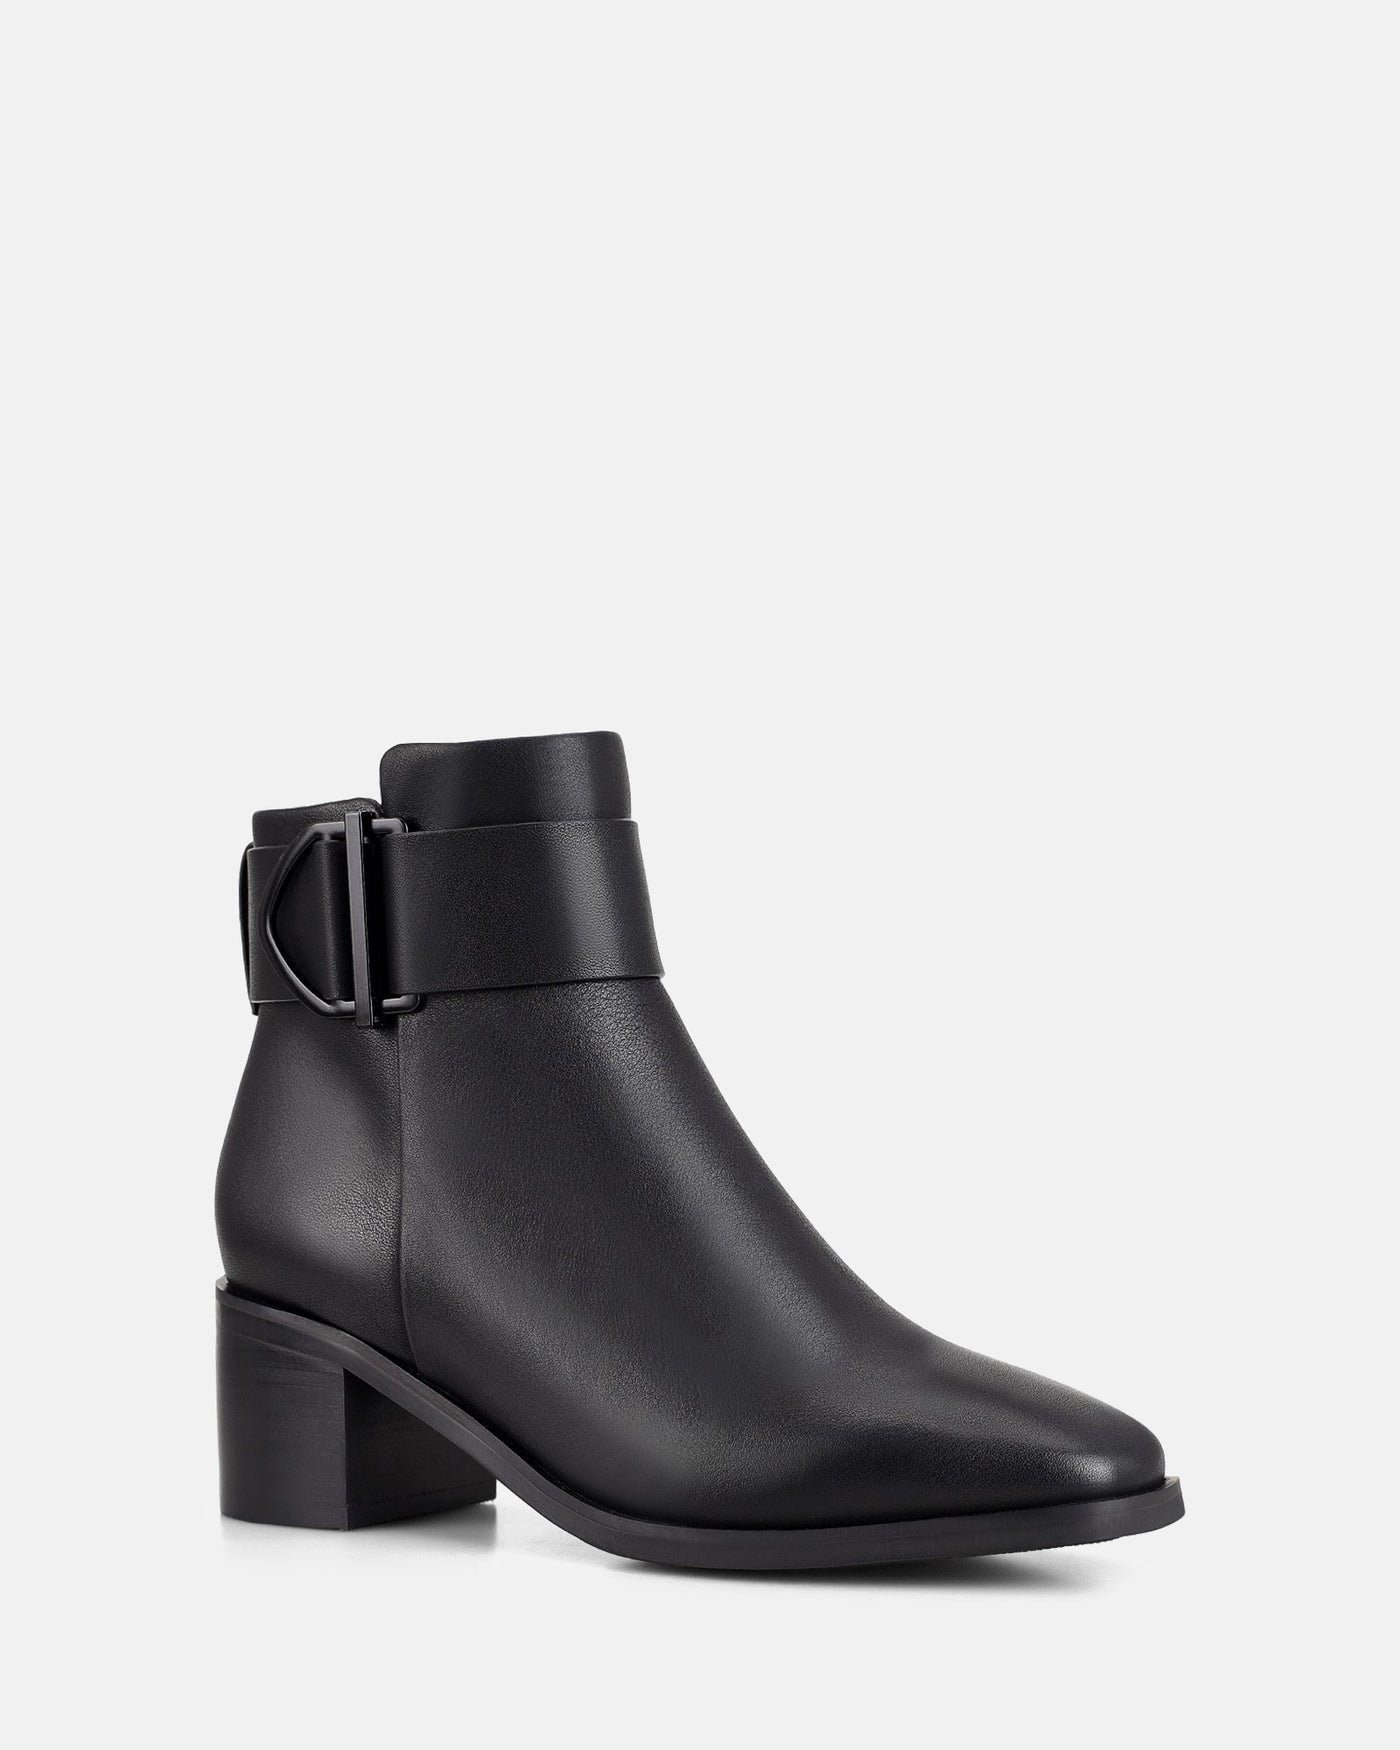 HUSH PUPPIES SPECIAL BLACK - Women Boots - Collective Shoes 